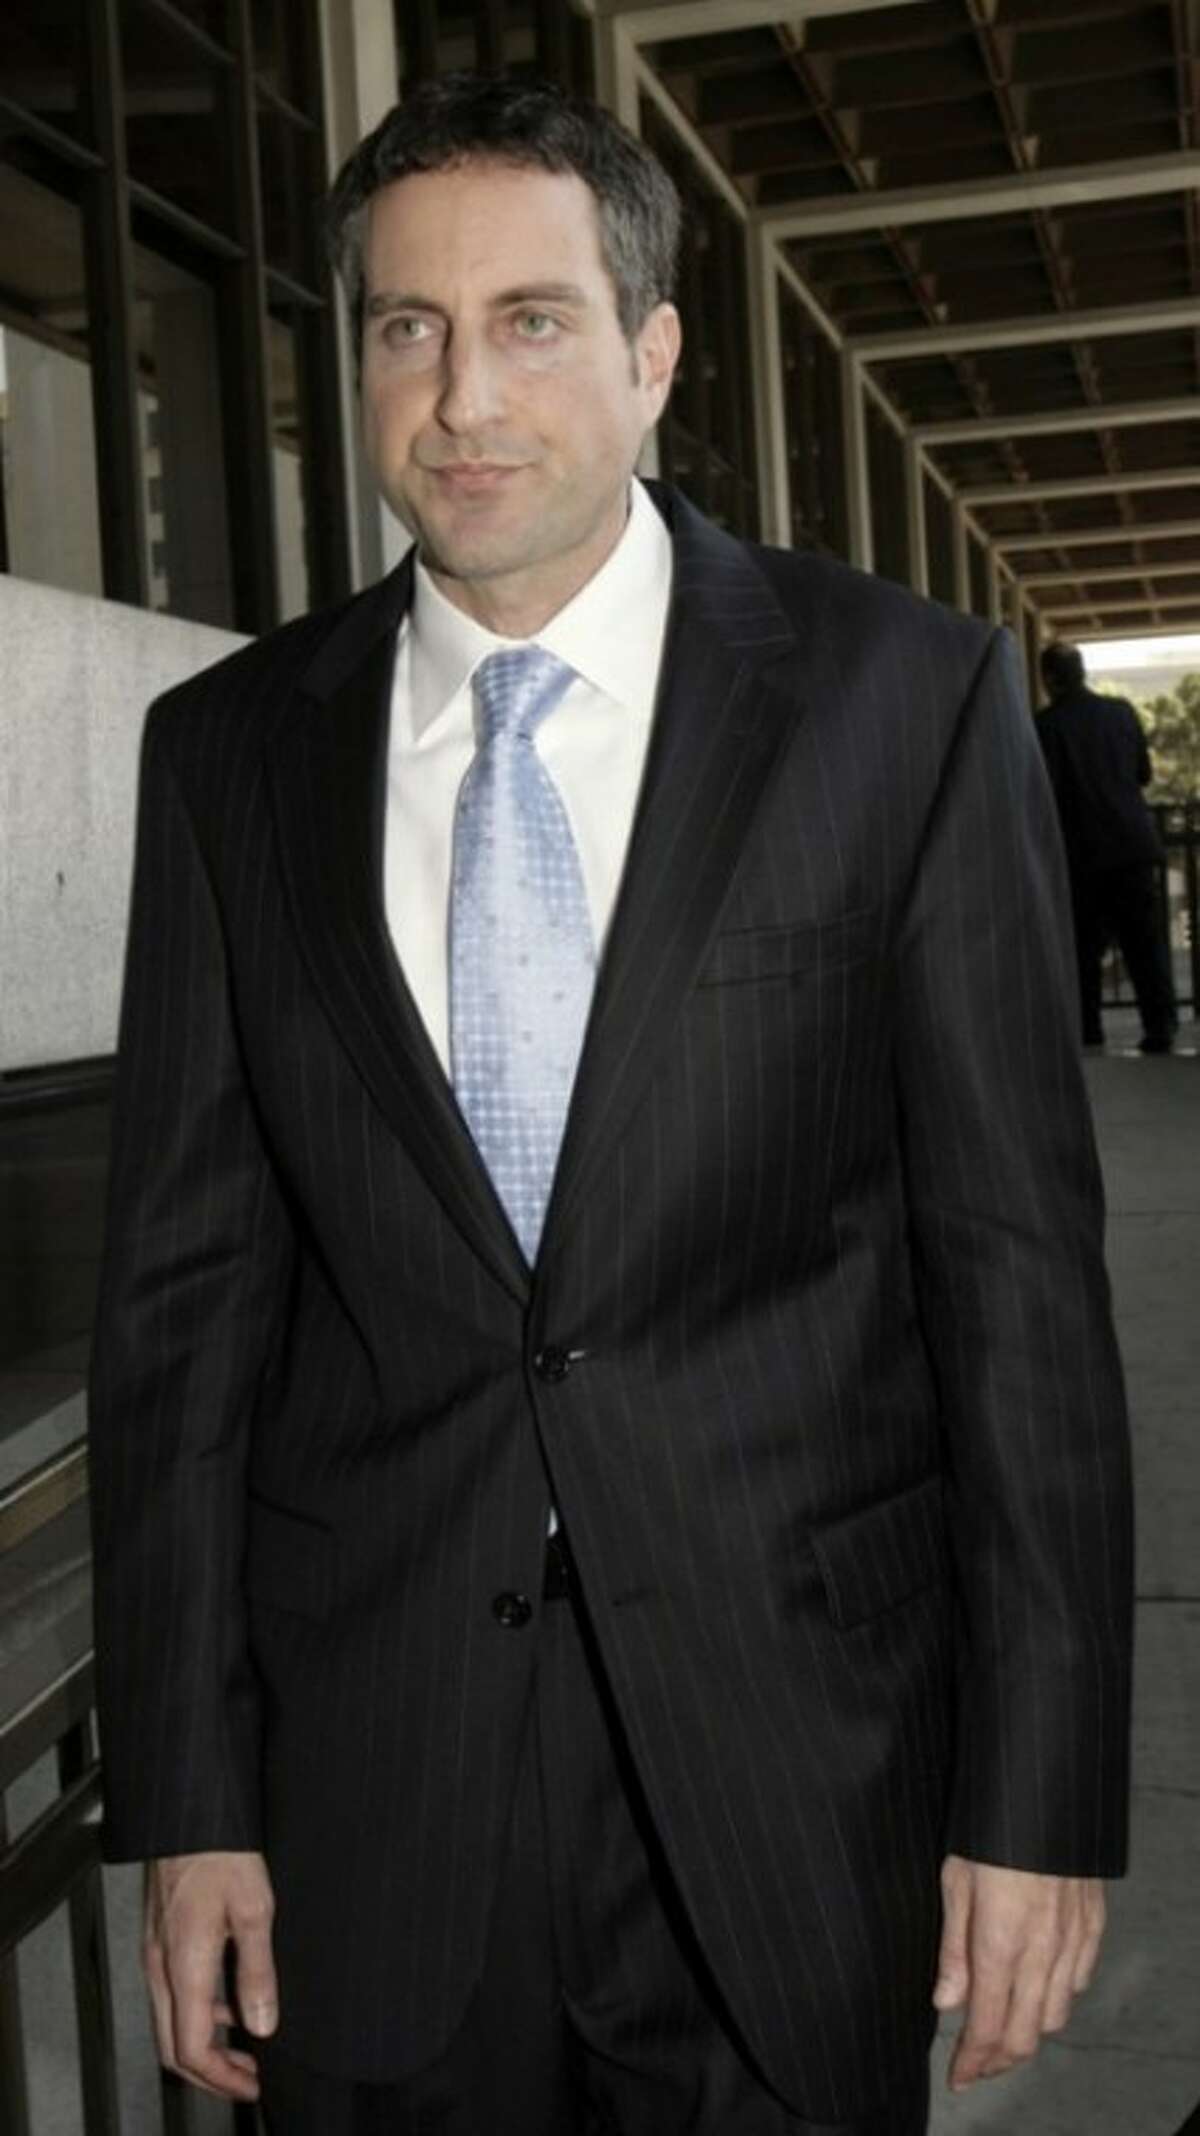 Attorney Howard Stern, boyfriend of Anna Nicole Smith, leaves court after a hearing Wednesday Sept. 23, 2009 in Los Angeles. The district attorney''s office filed an amended complaint Wednesday in Los Angeles against Stern. He is billed as an aider and abettor of two doctors charged with prescribing drugs that killed the former Playboy model in 2007. (AP Photo/Nick Ut)